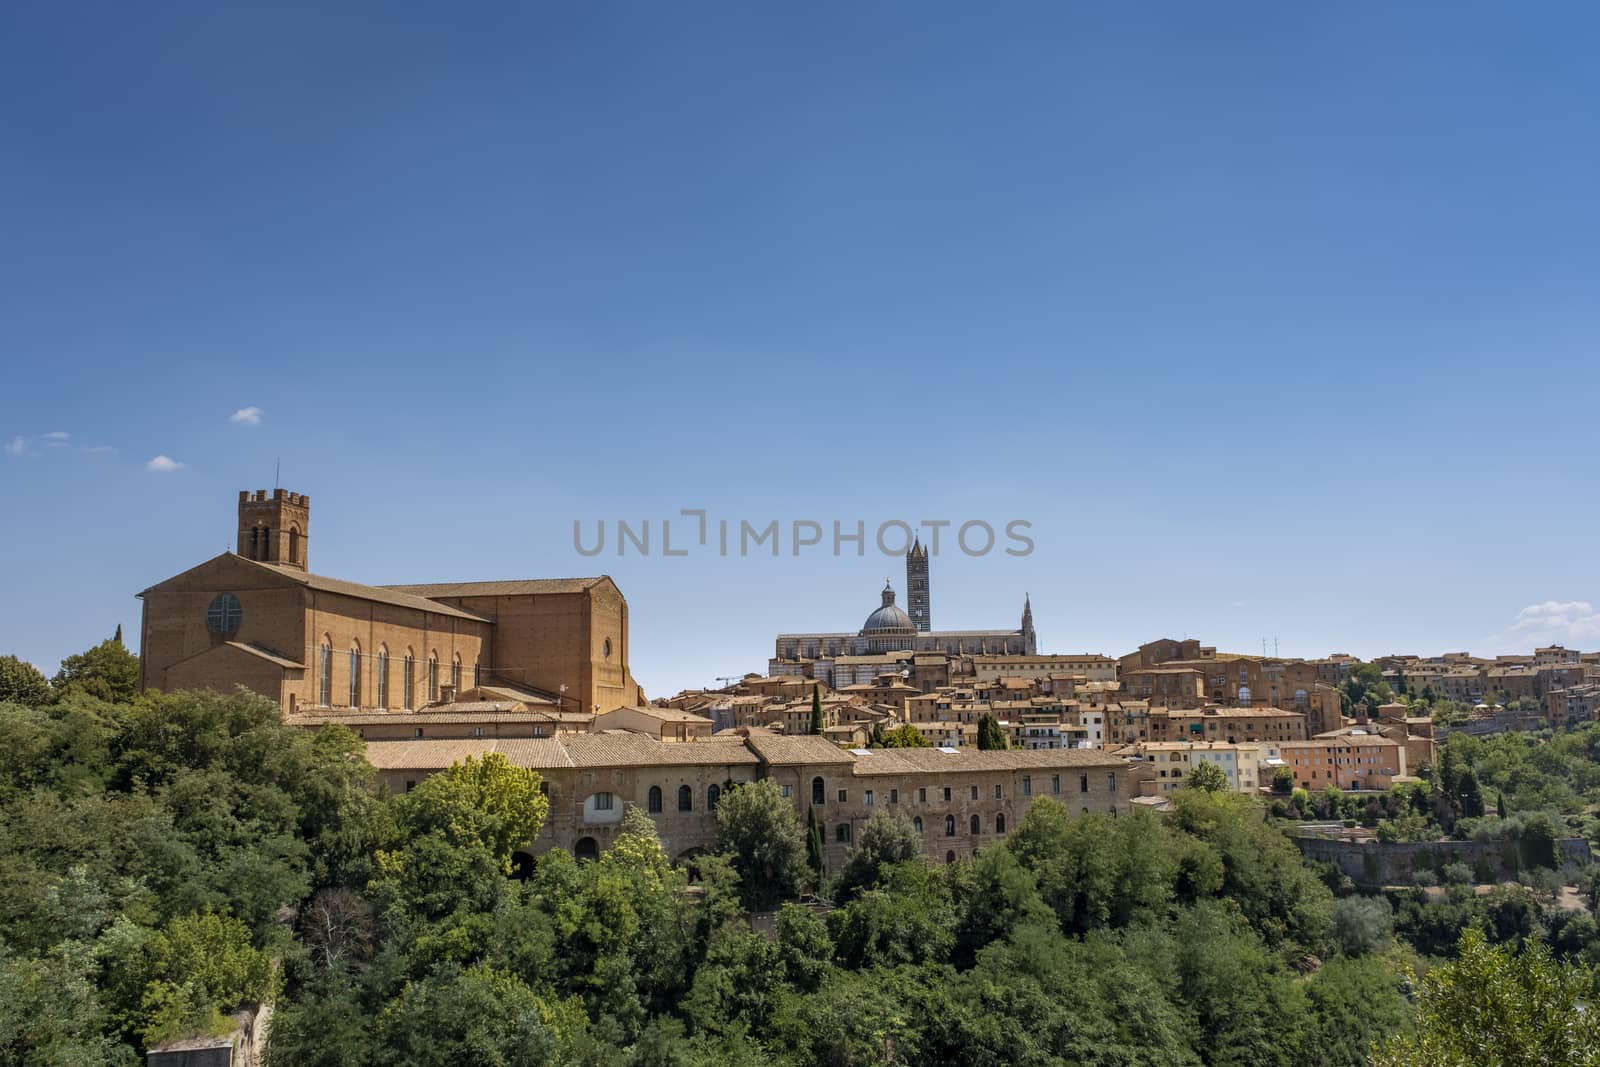 The Basilica of San Domenico from Siena in Italy